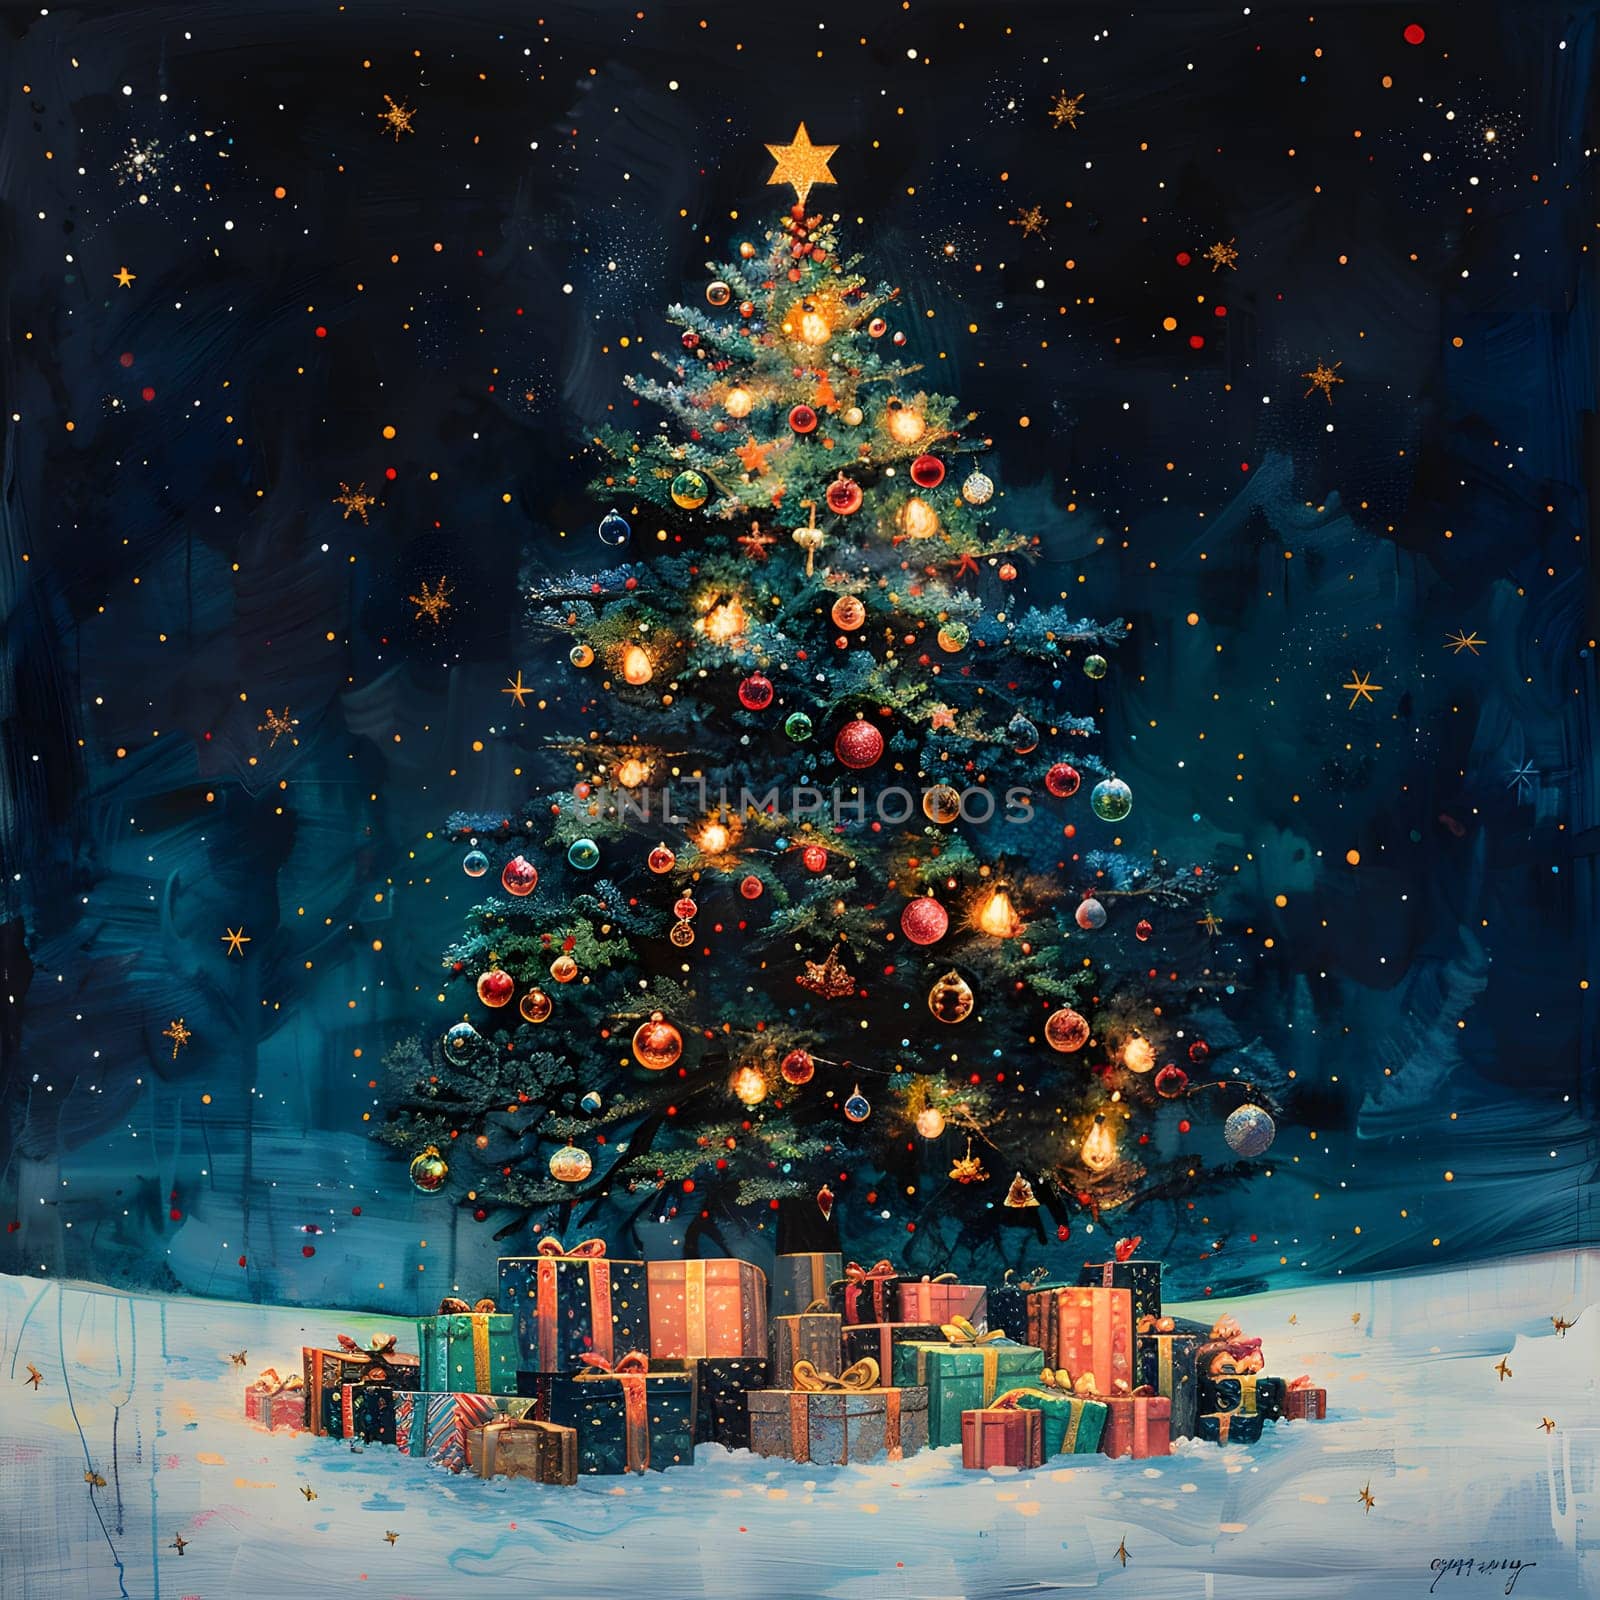 An exquisite painting depicting a beautifully decorated Christmas tree with colorful ornaments, surrounded by gifts underneath. The scene is set in a snowy world, enhancing the festive atmosphere